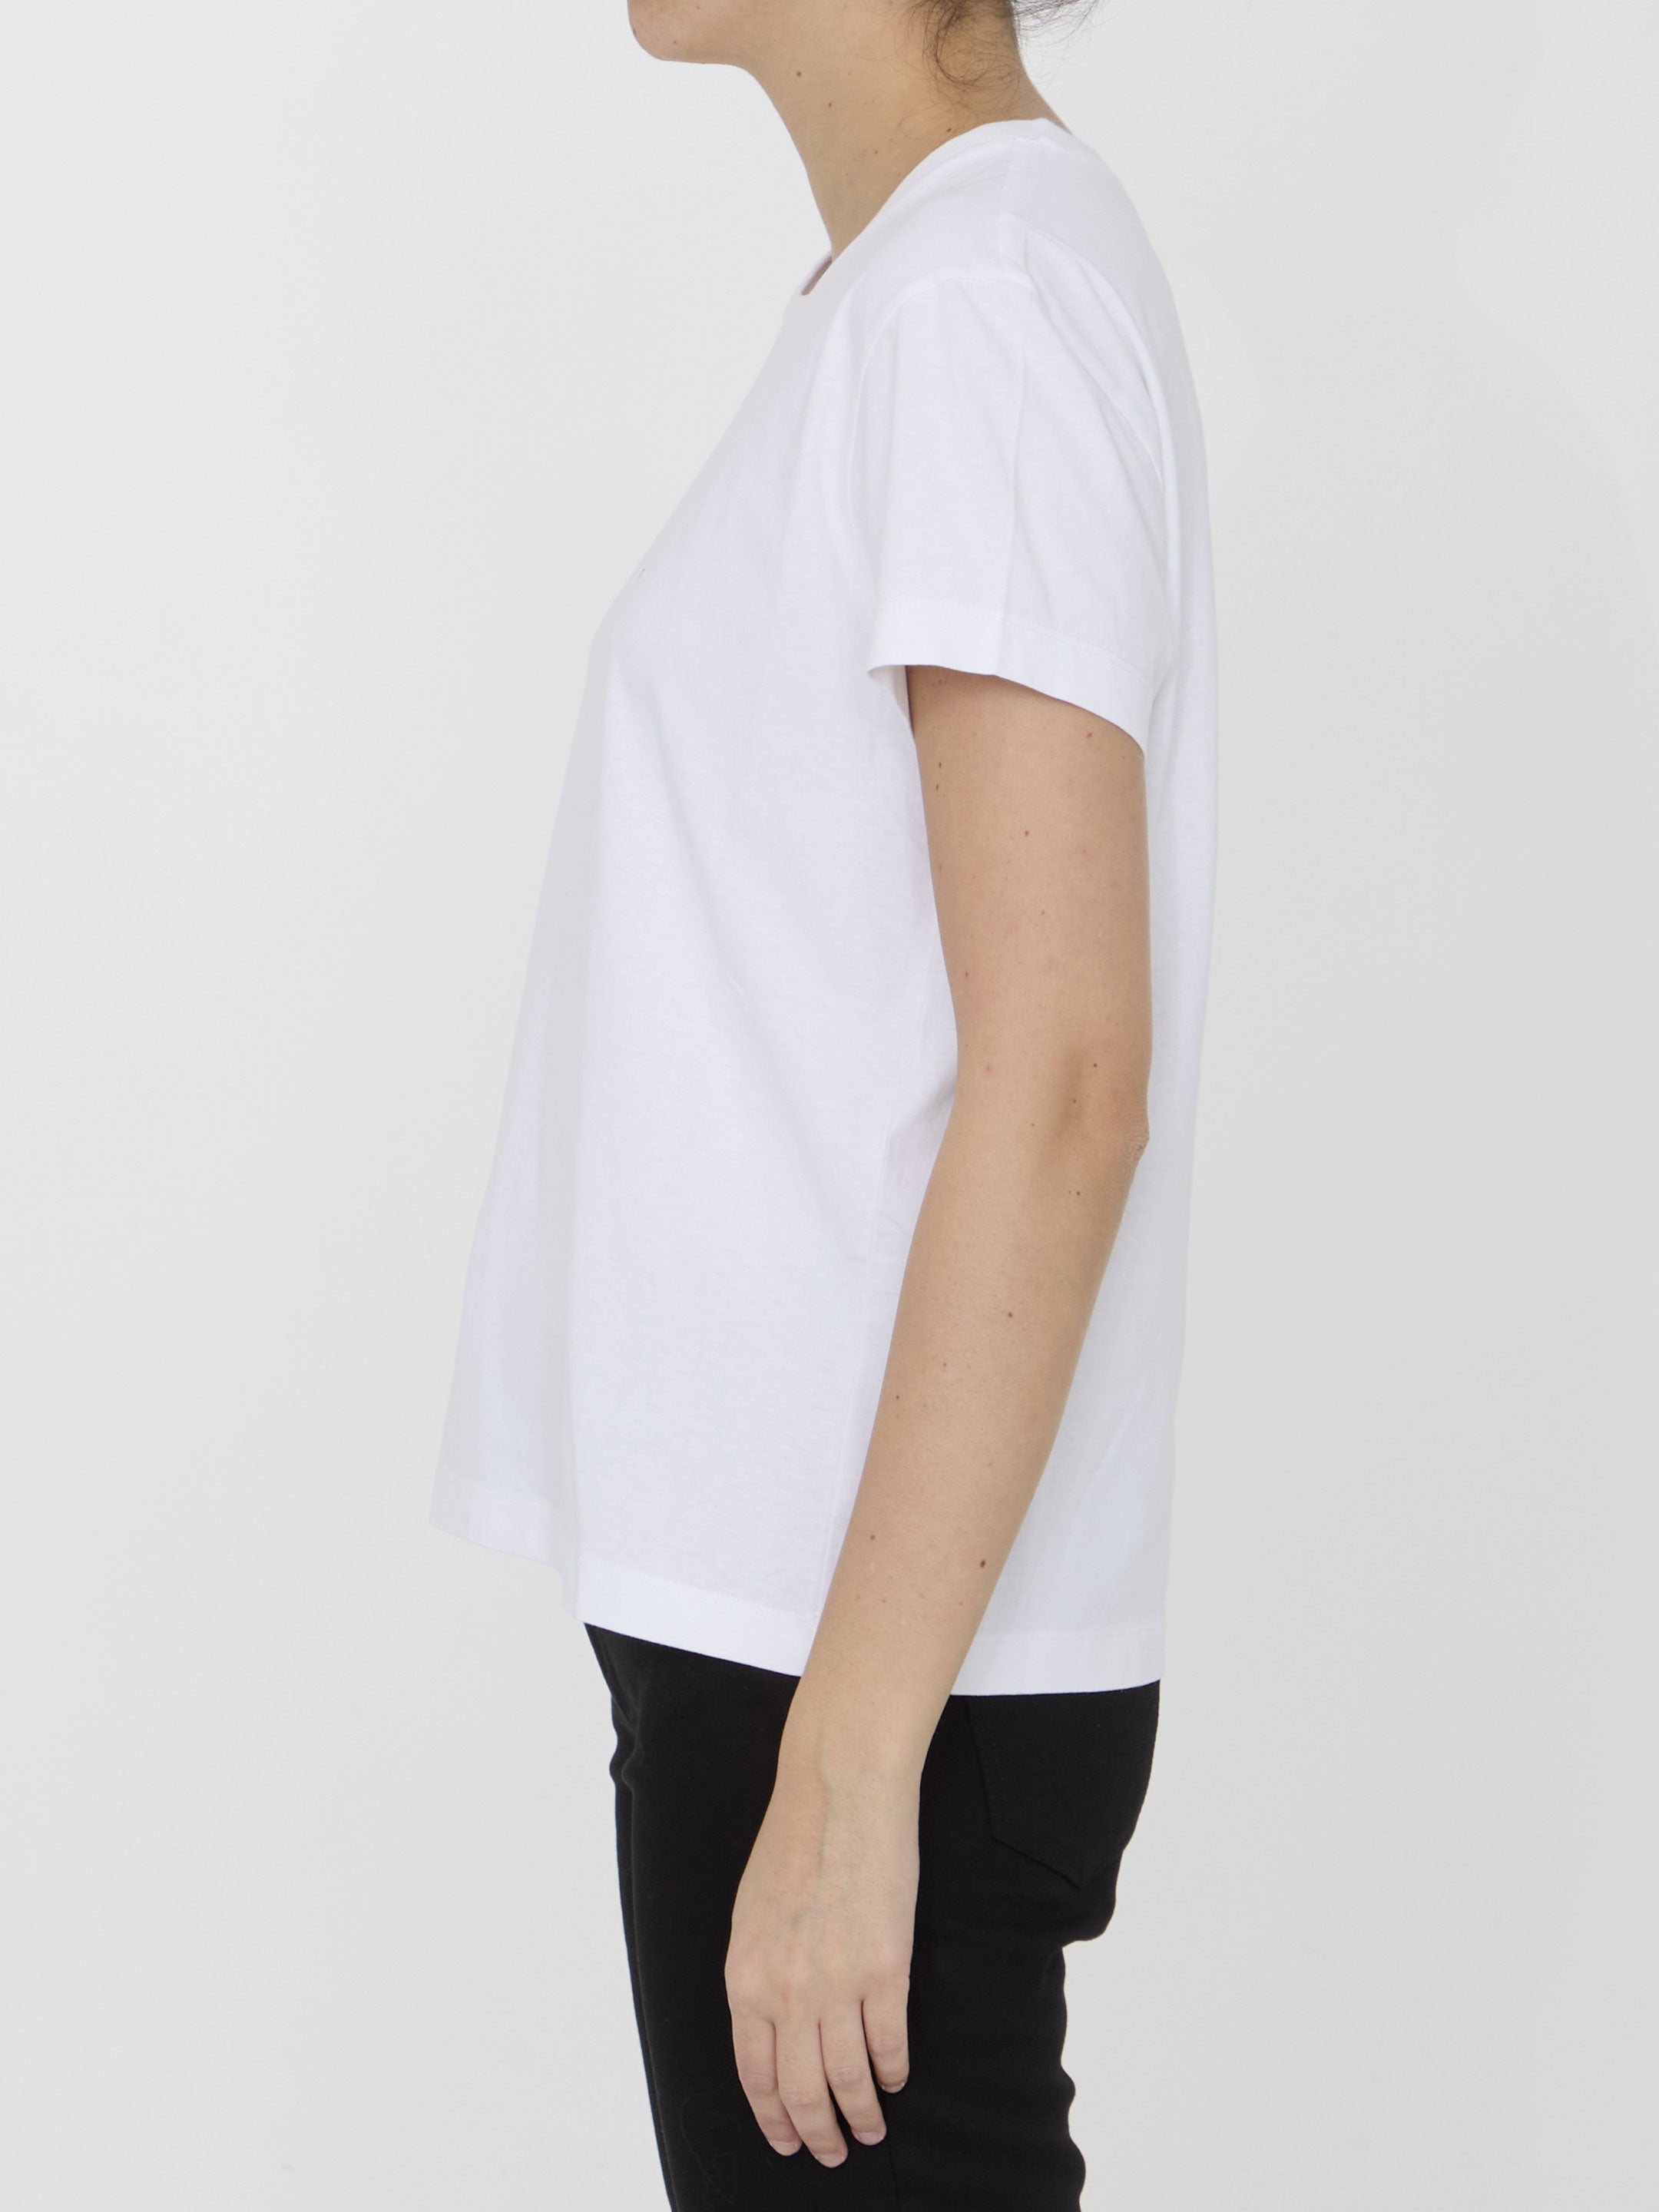 STELLA-MCCARTNEY-OUTLET-SALE-Embroidered-t-shirt-Shirts-ARCHIVE-COLLECTION-3.jpg